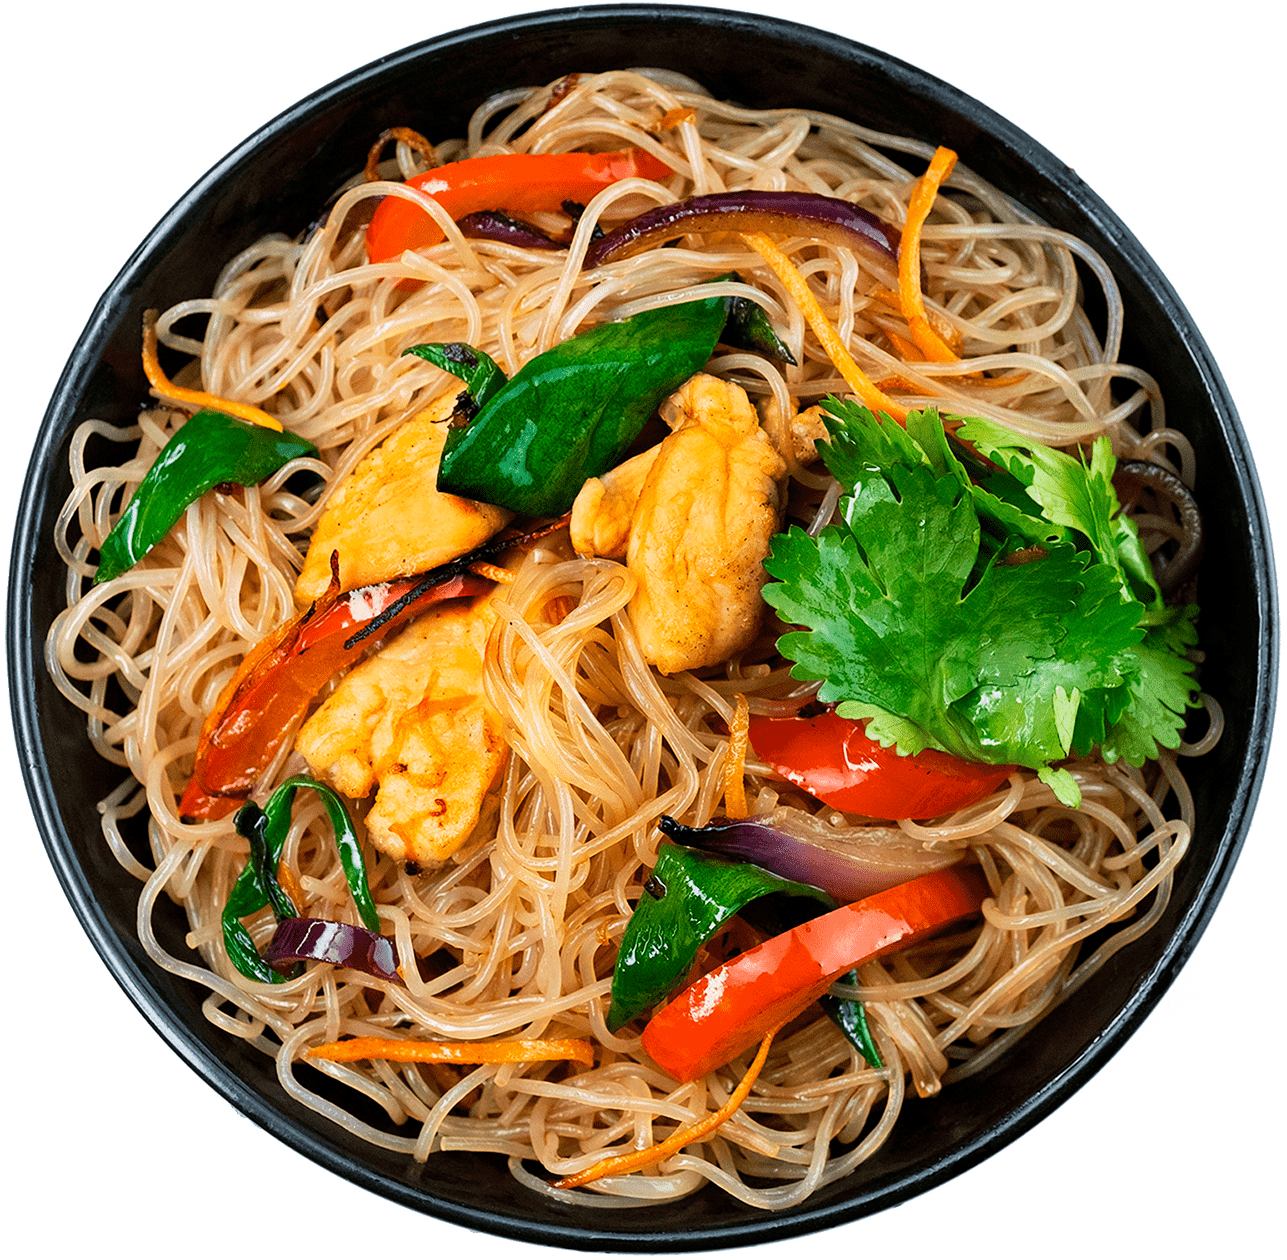  Recipe for Singapore noodles with chicken